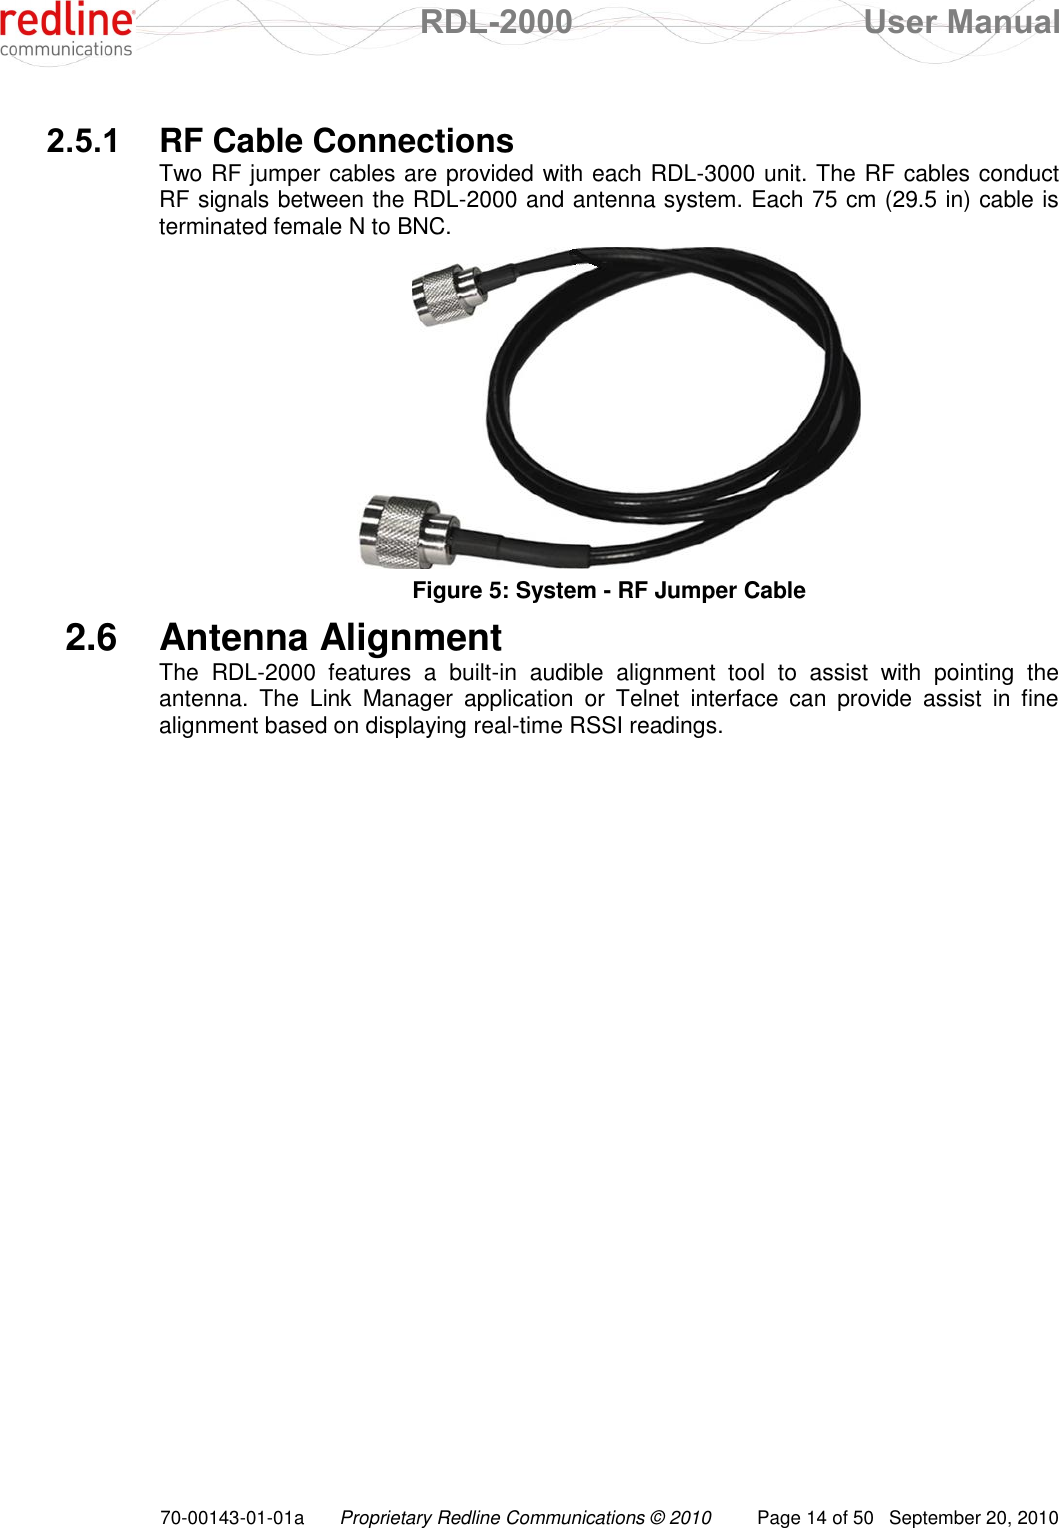  RDL-2000  User Manual 70-00143-01-01a Proprietary Redline Communications © 2010  Page 14 of 50  September 20, 2010  2.5.1  RF Cable Connections Two RF jumper cables are provided with each RDL-3000 unit. The RF cables conduct RF signals between the RDL-2000 and antenna system. Each 75 cm (29.5 in) cable is terminated female N to BNC.  Figure 5: System - RF Jumper Cable 2.6  Antenna Alignment The  RDL-2000  features  a  built-in  audible  alignment  tool  to  assist  with  pointing  the antenna.  The  Link  Manager  application  or  Telnet  interface  can  provide  assist  in  fine alignment based on displaying real-time RSSI readings.  